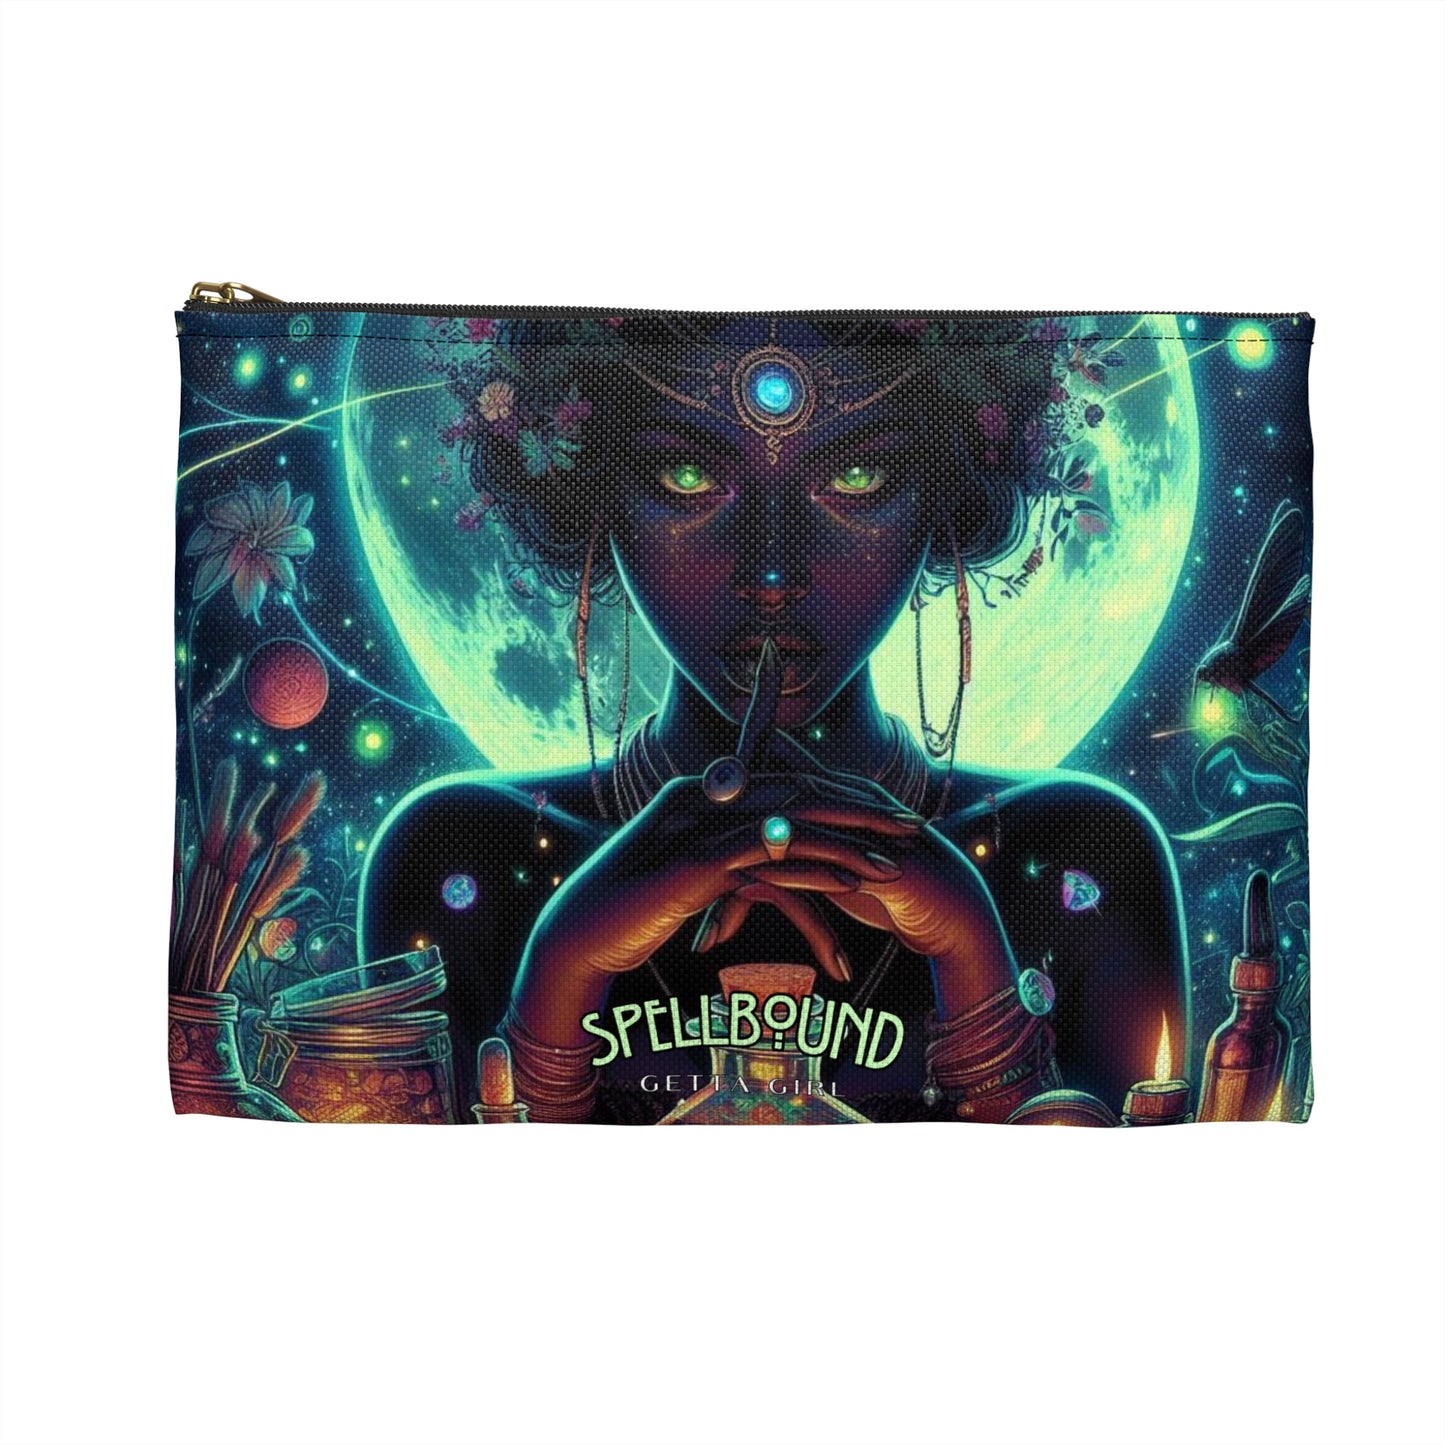 SPELLBOUND Accessory Pouch: Toiletries Bag, On-the-go Items, Tarot Deck, Crystals Bag